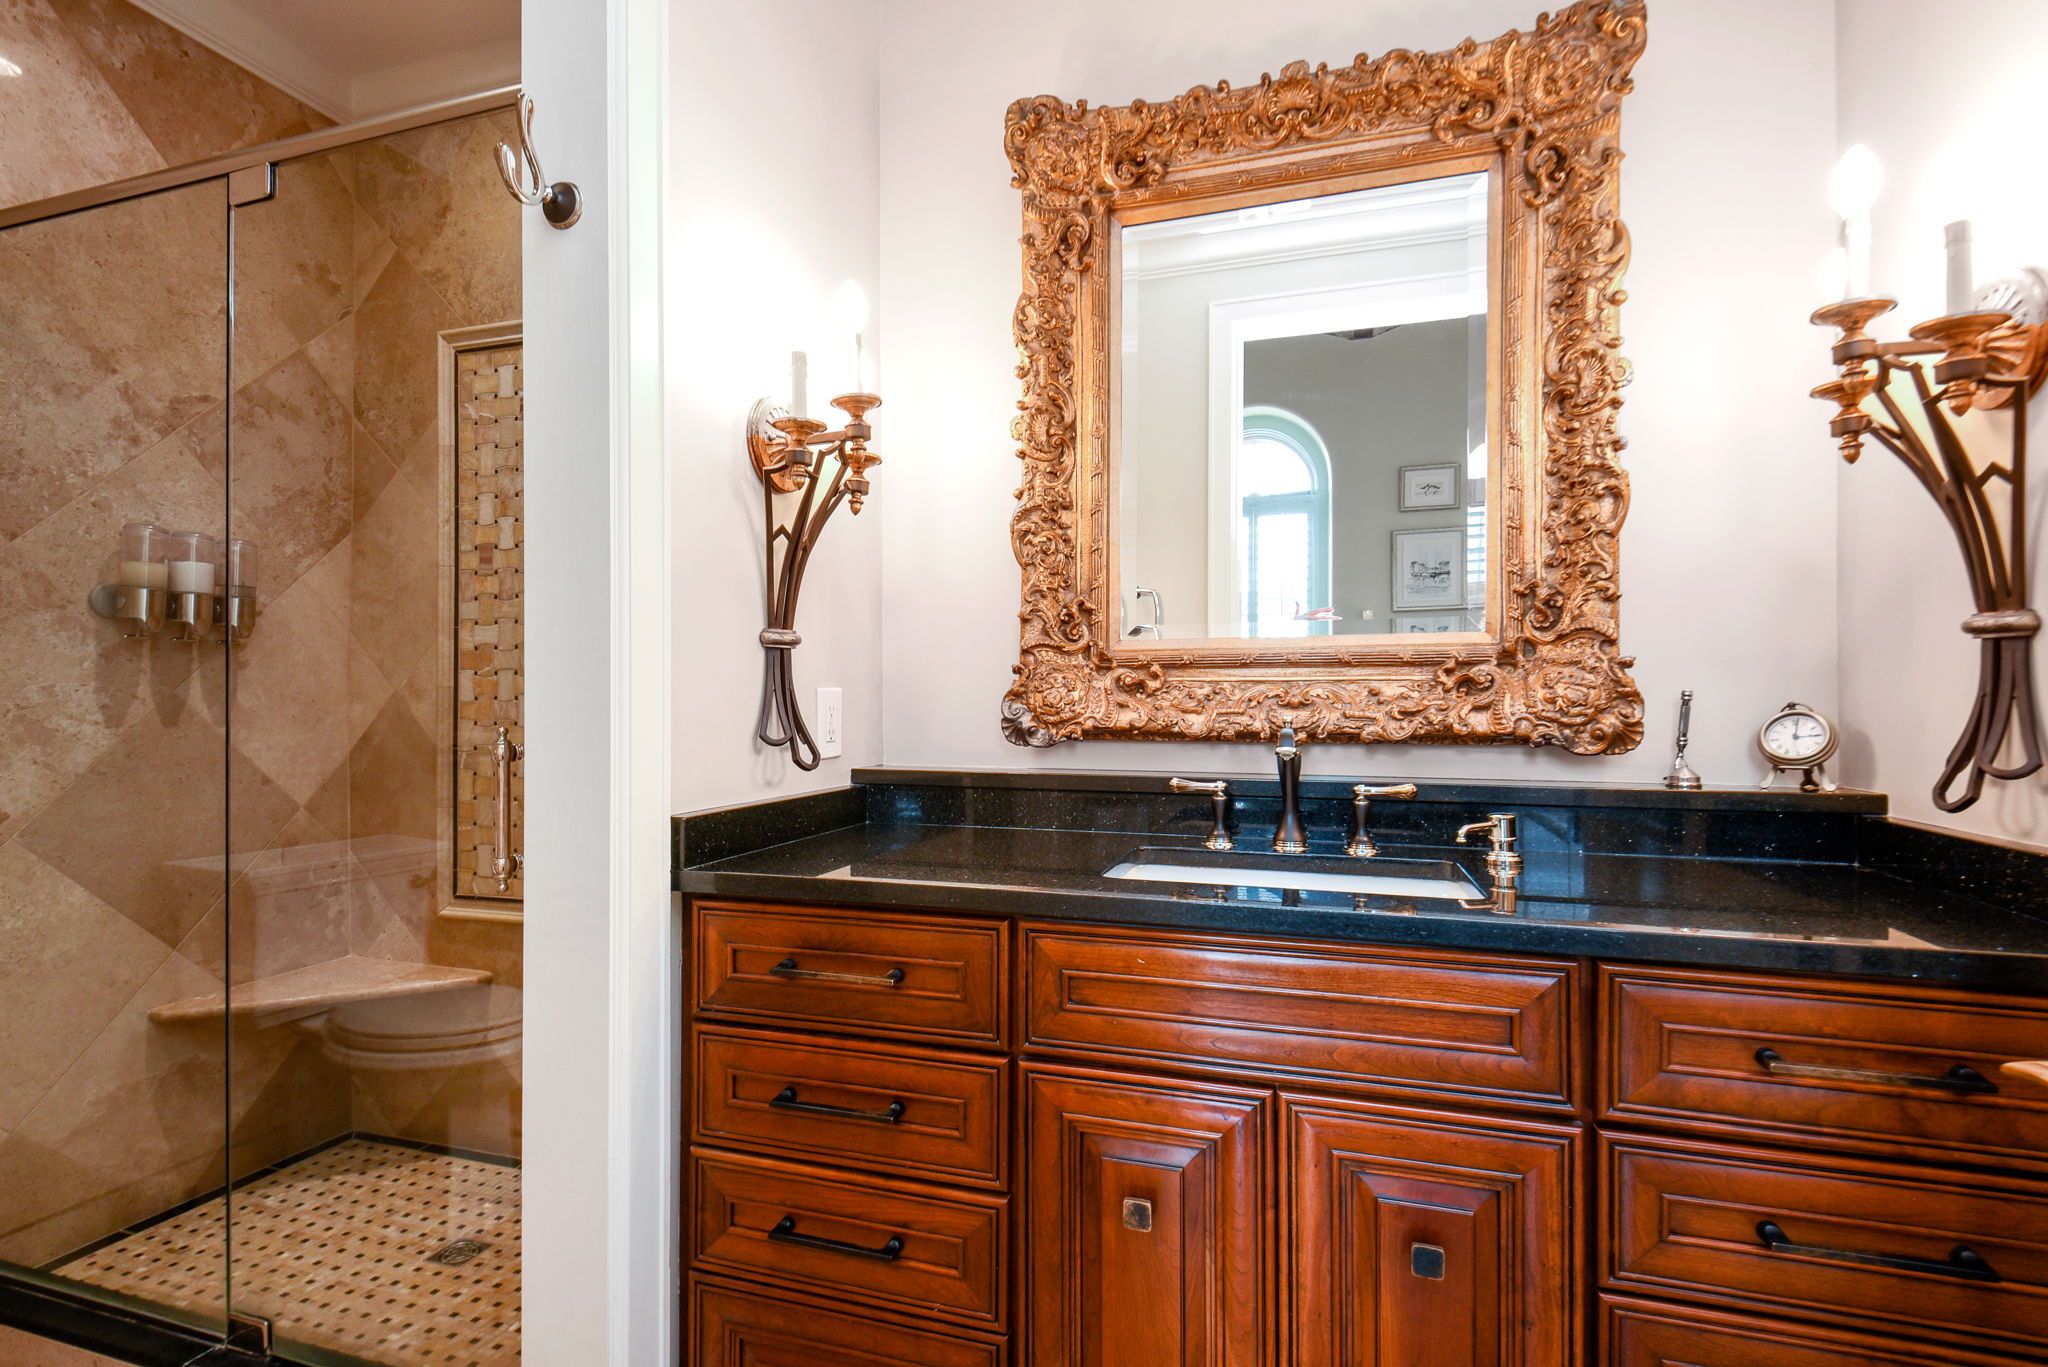 A bathroom with dark brown cabinets and a gold mirror.